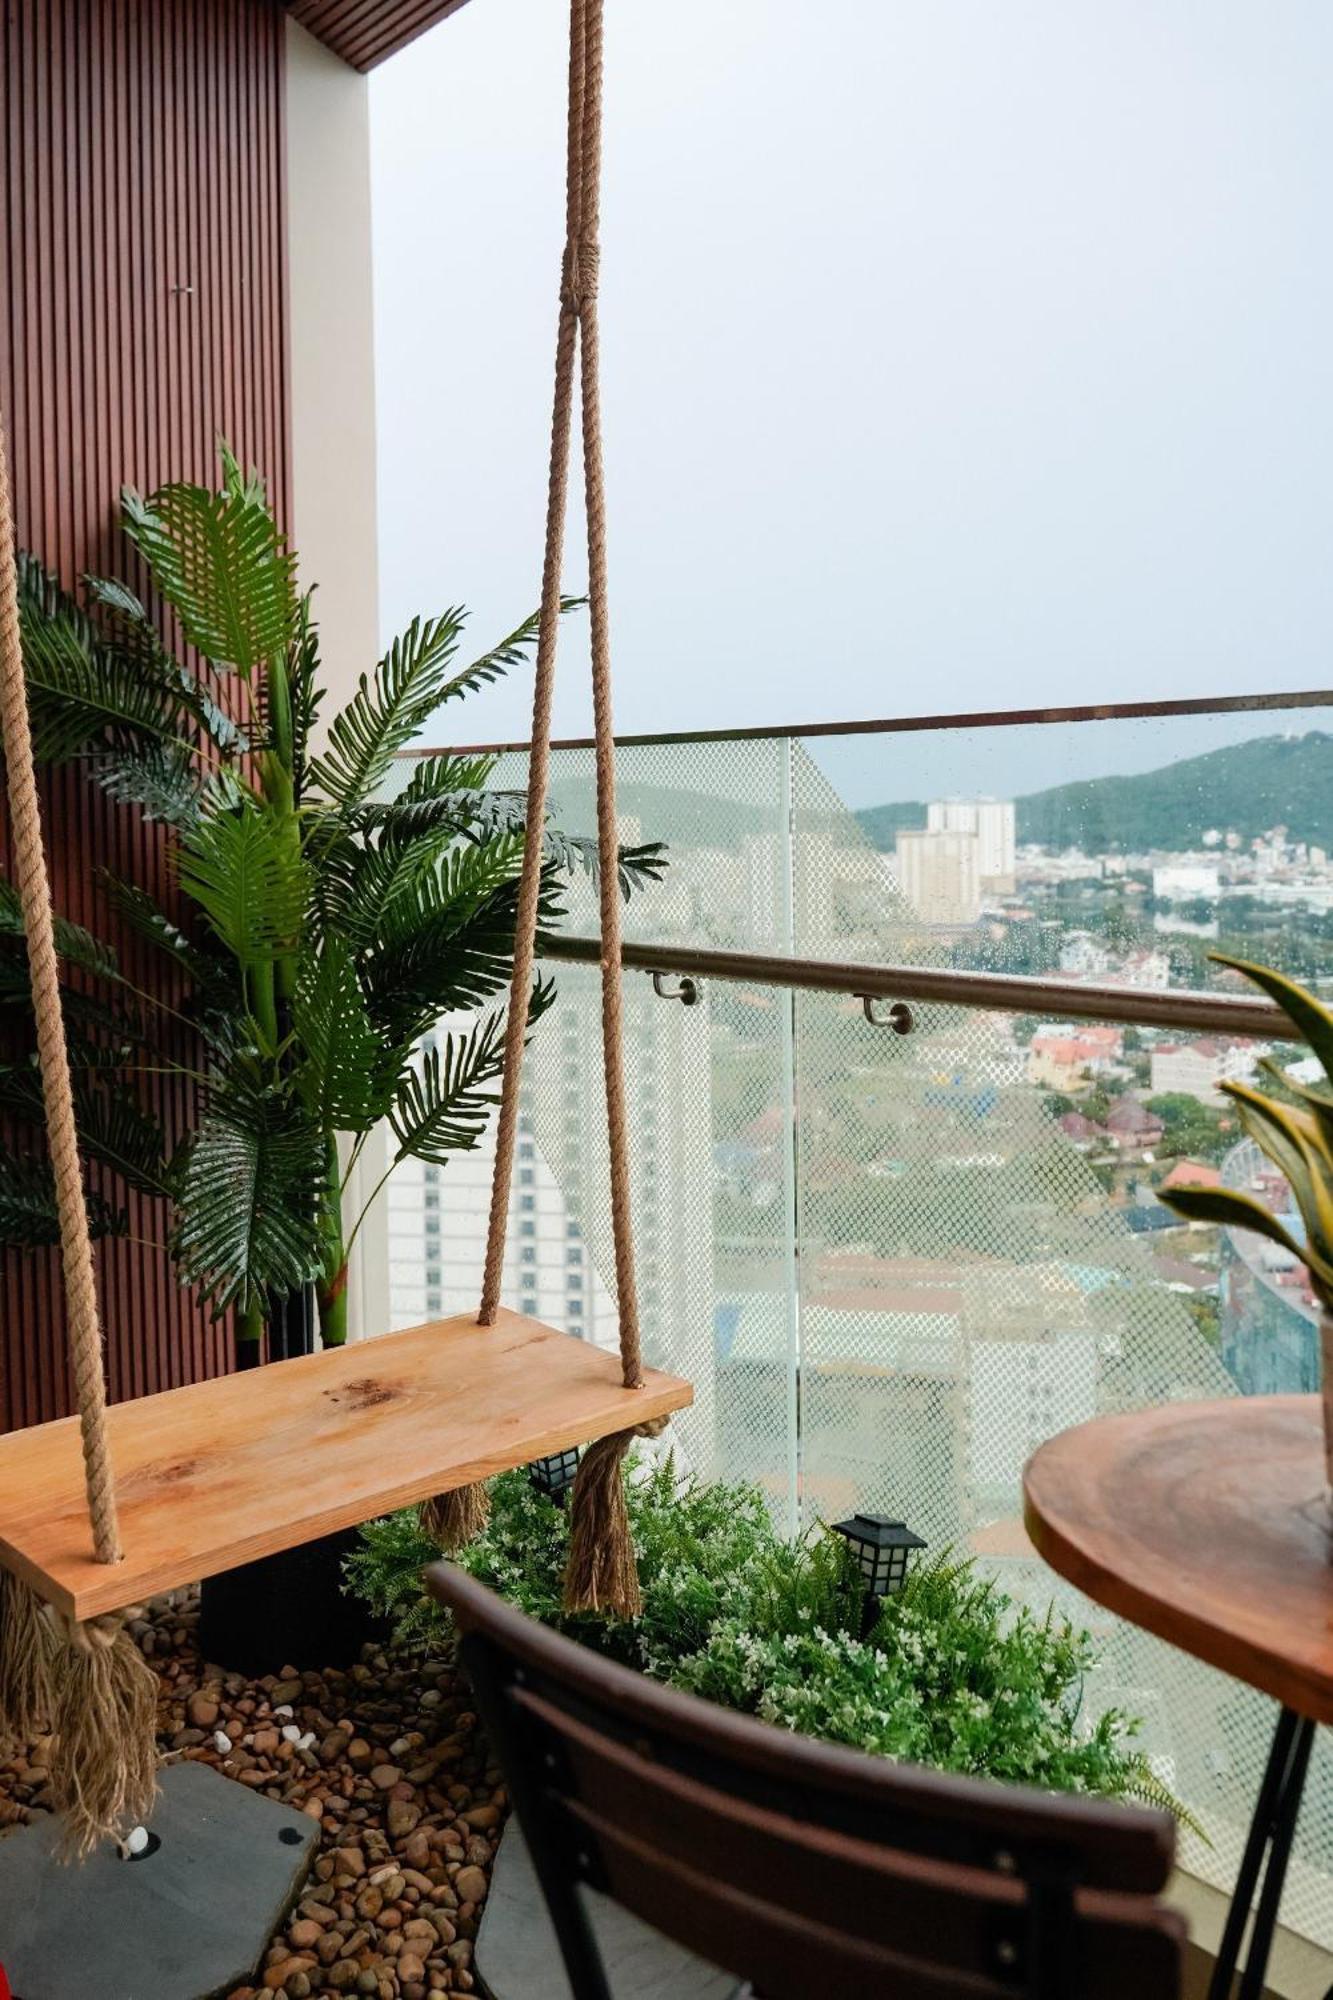 The Song Vung Tau - Five-Star Luxury Apartment - Can Ho Du Lich 5 Sao Canh Bien Exterior foto